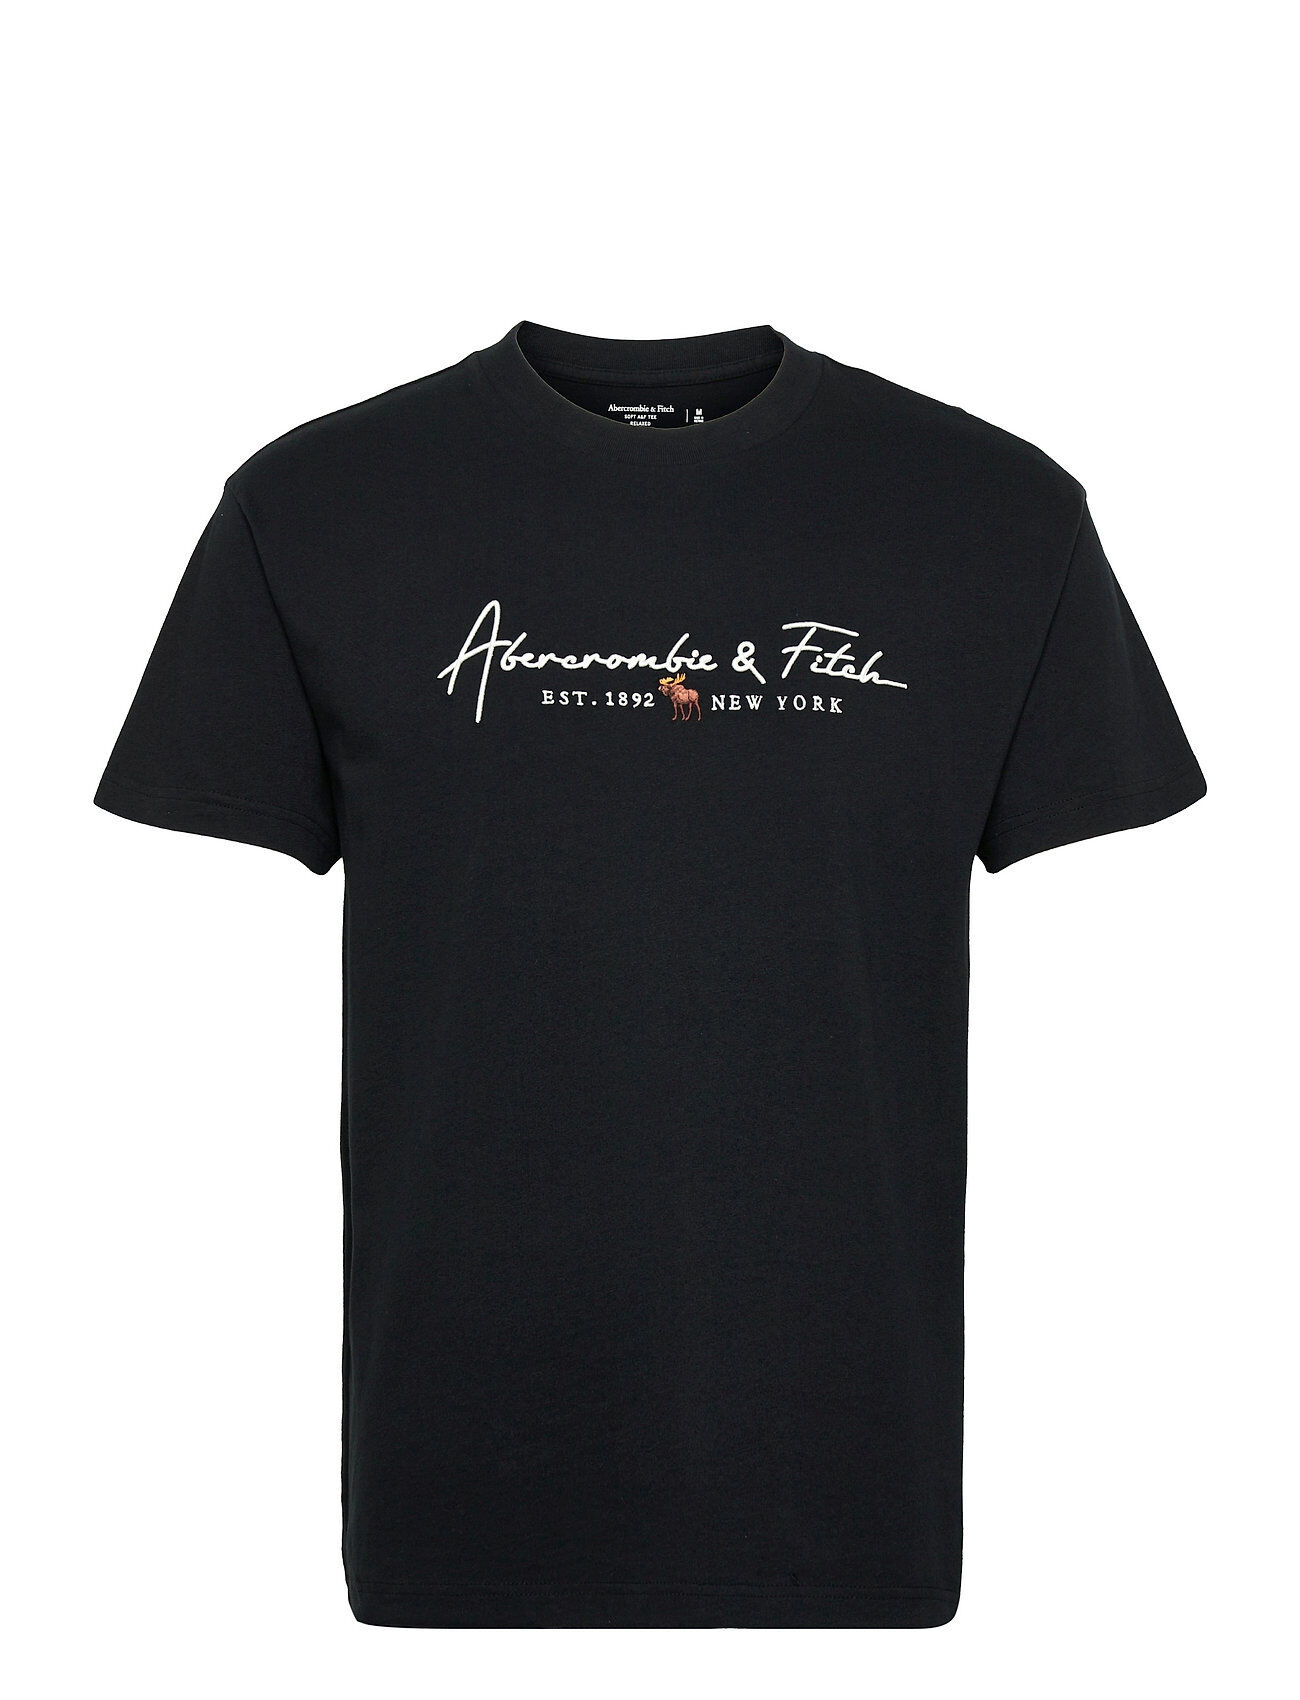 Abercrombie & Fitch Anf Mens Graphics T-shirts Short-sleeved Svart Abercrombie & Fitch